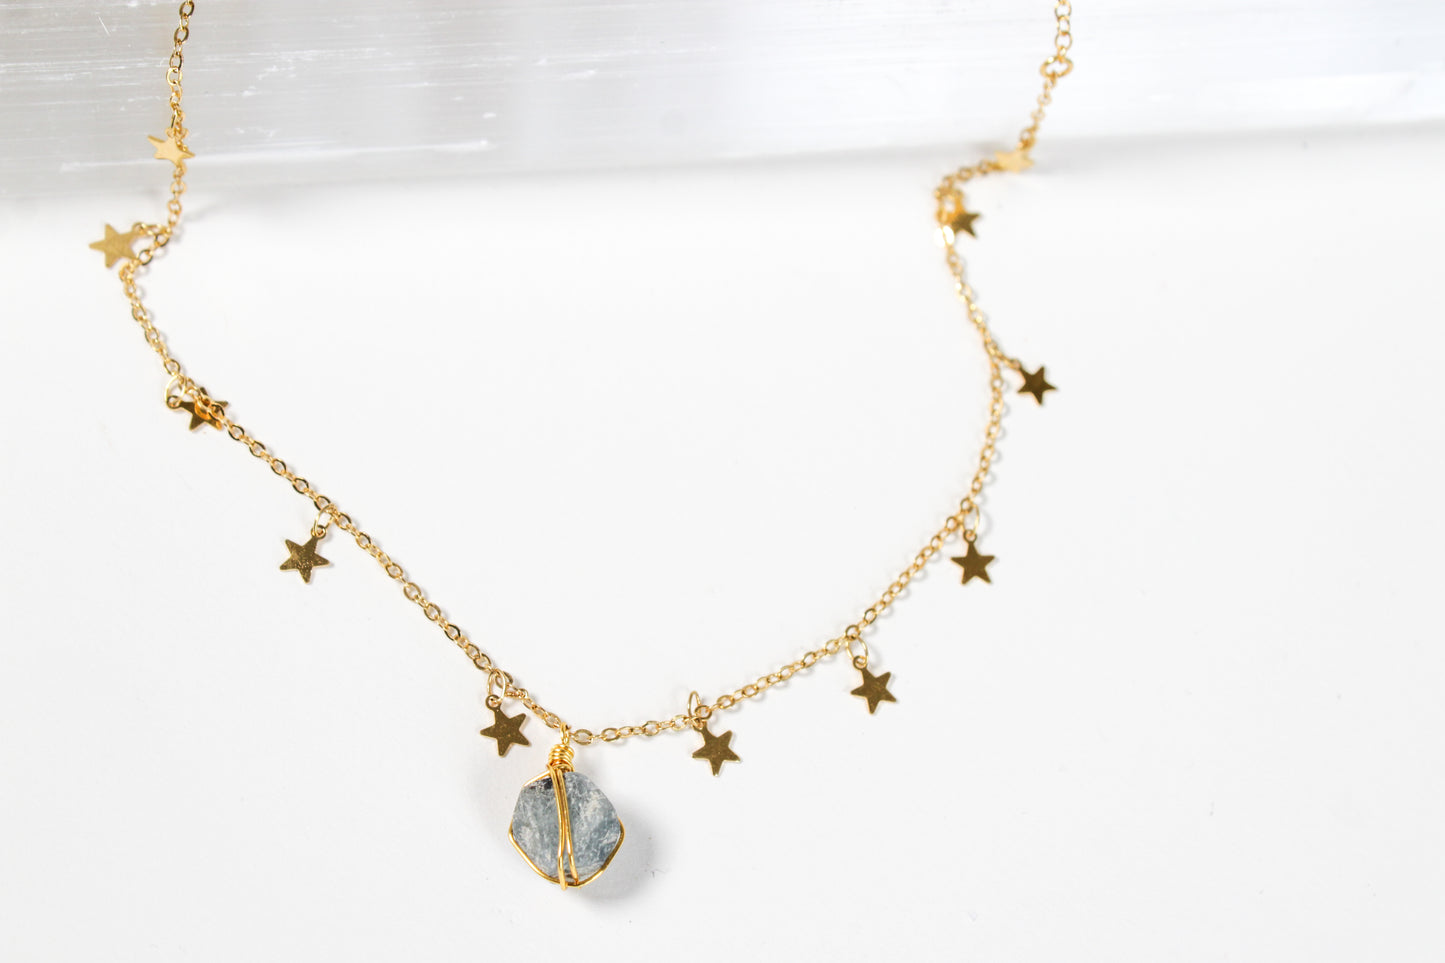 Prosperity. Necklace with rustic sapphire and star chain